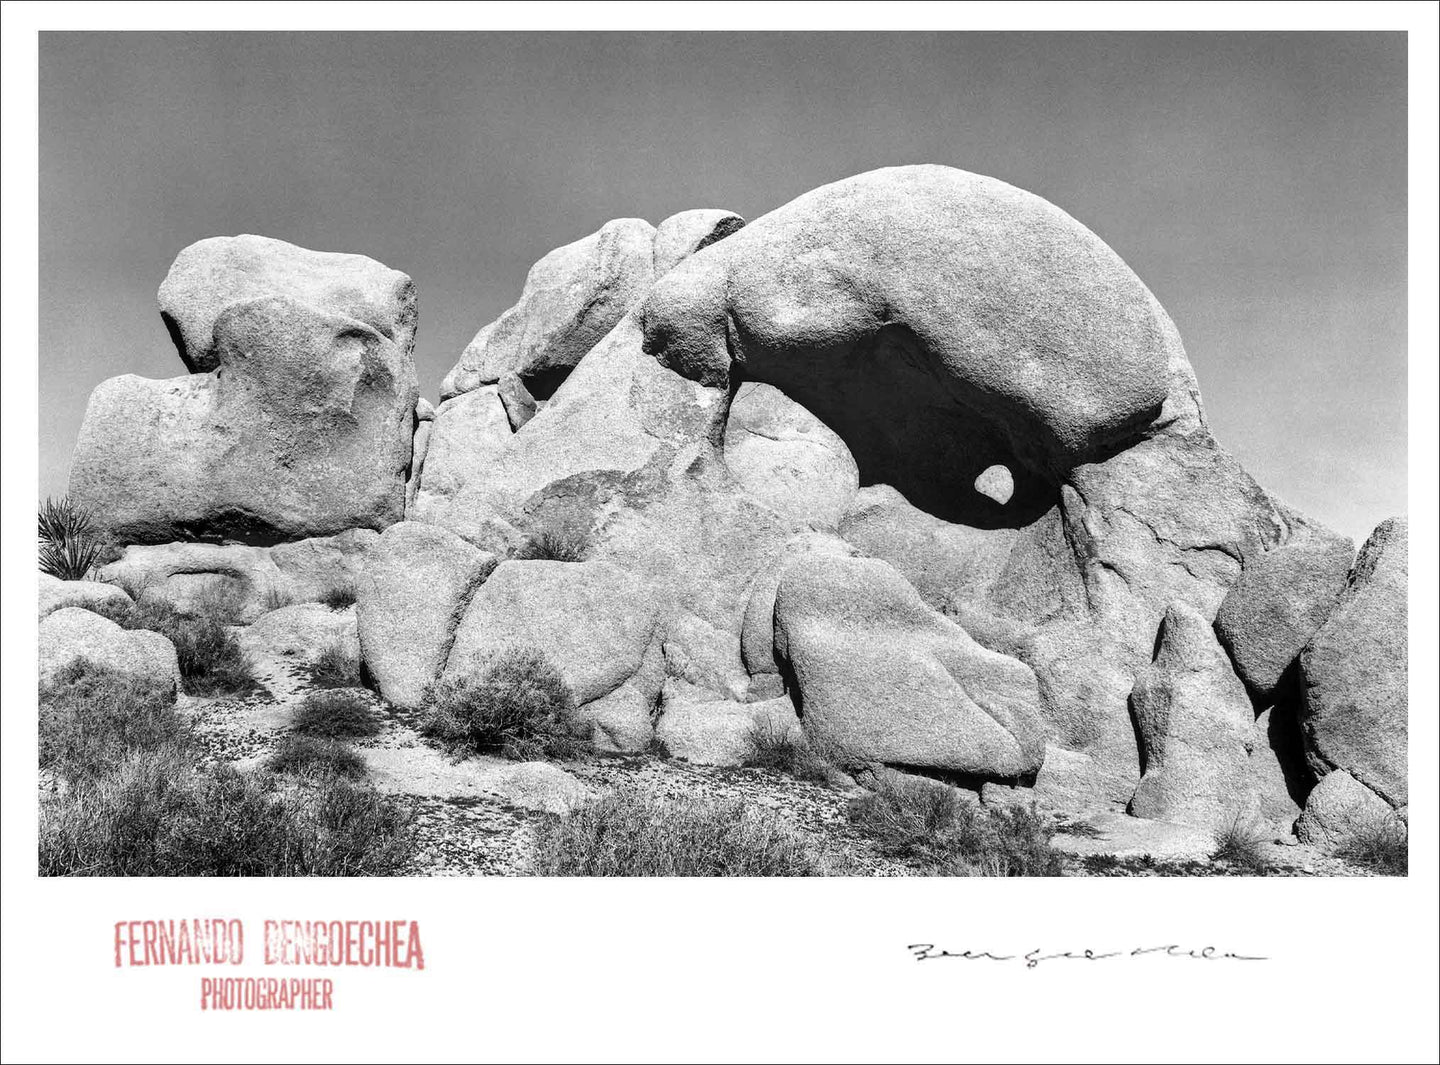 JOSHUA TREE ROCKS - Giclee Print - Stamped and Signed